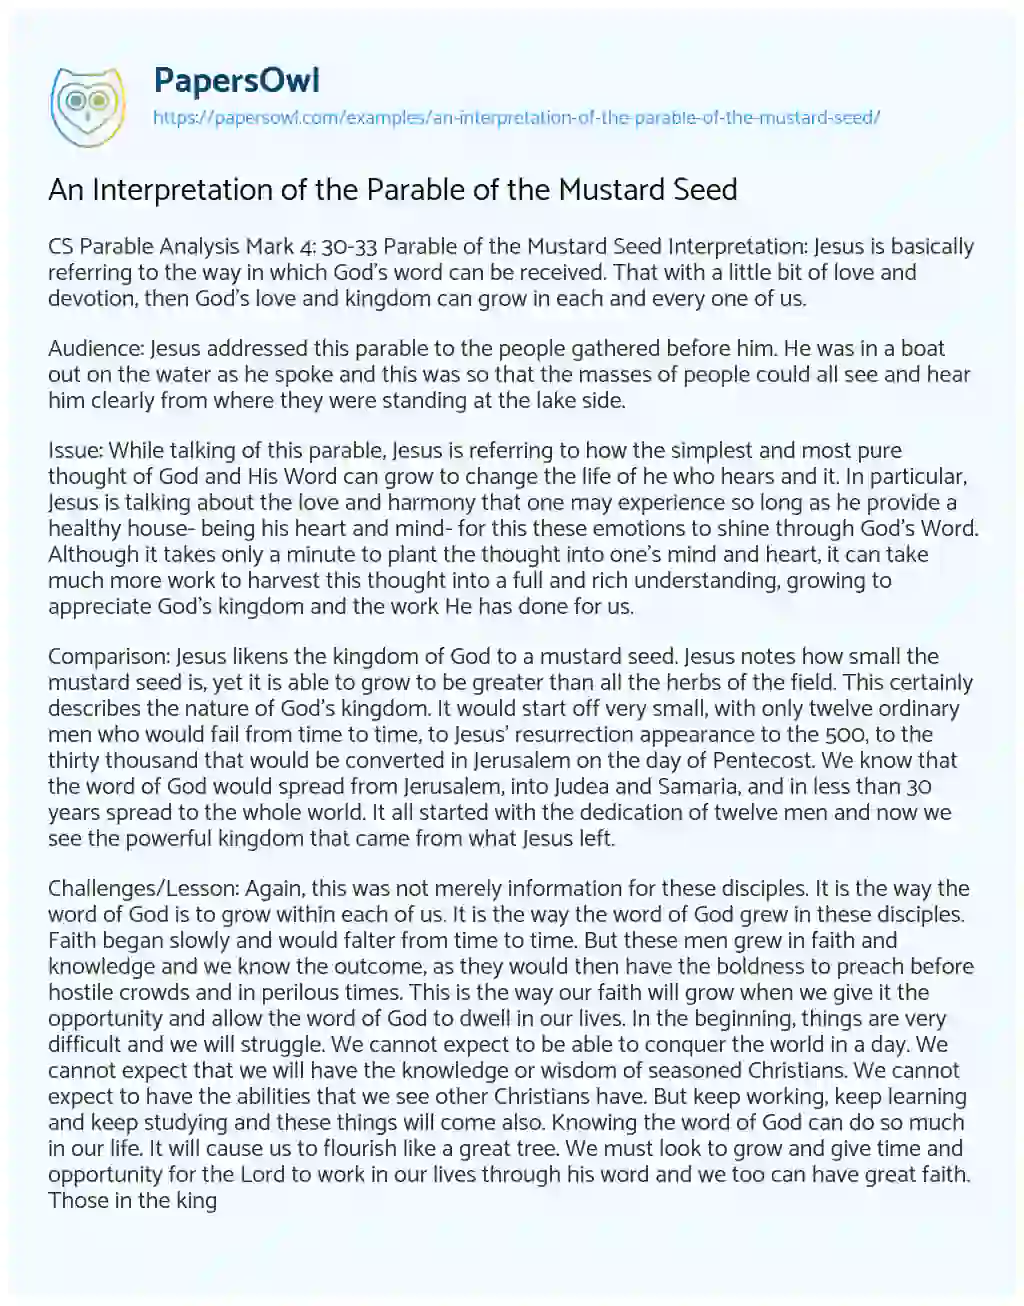 Essay on An Interpretation of the Parable of the Mustard Seed